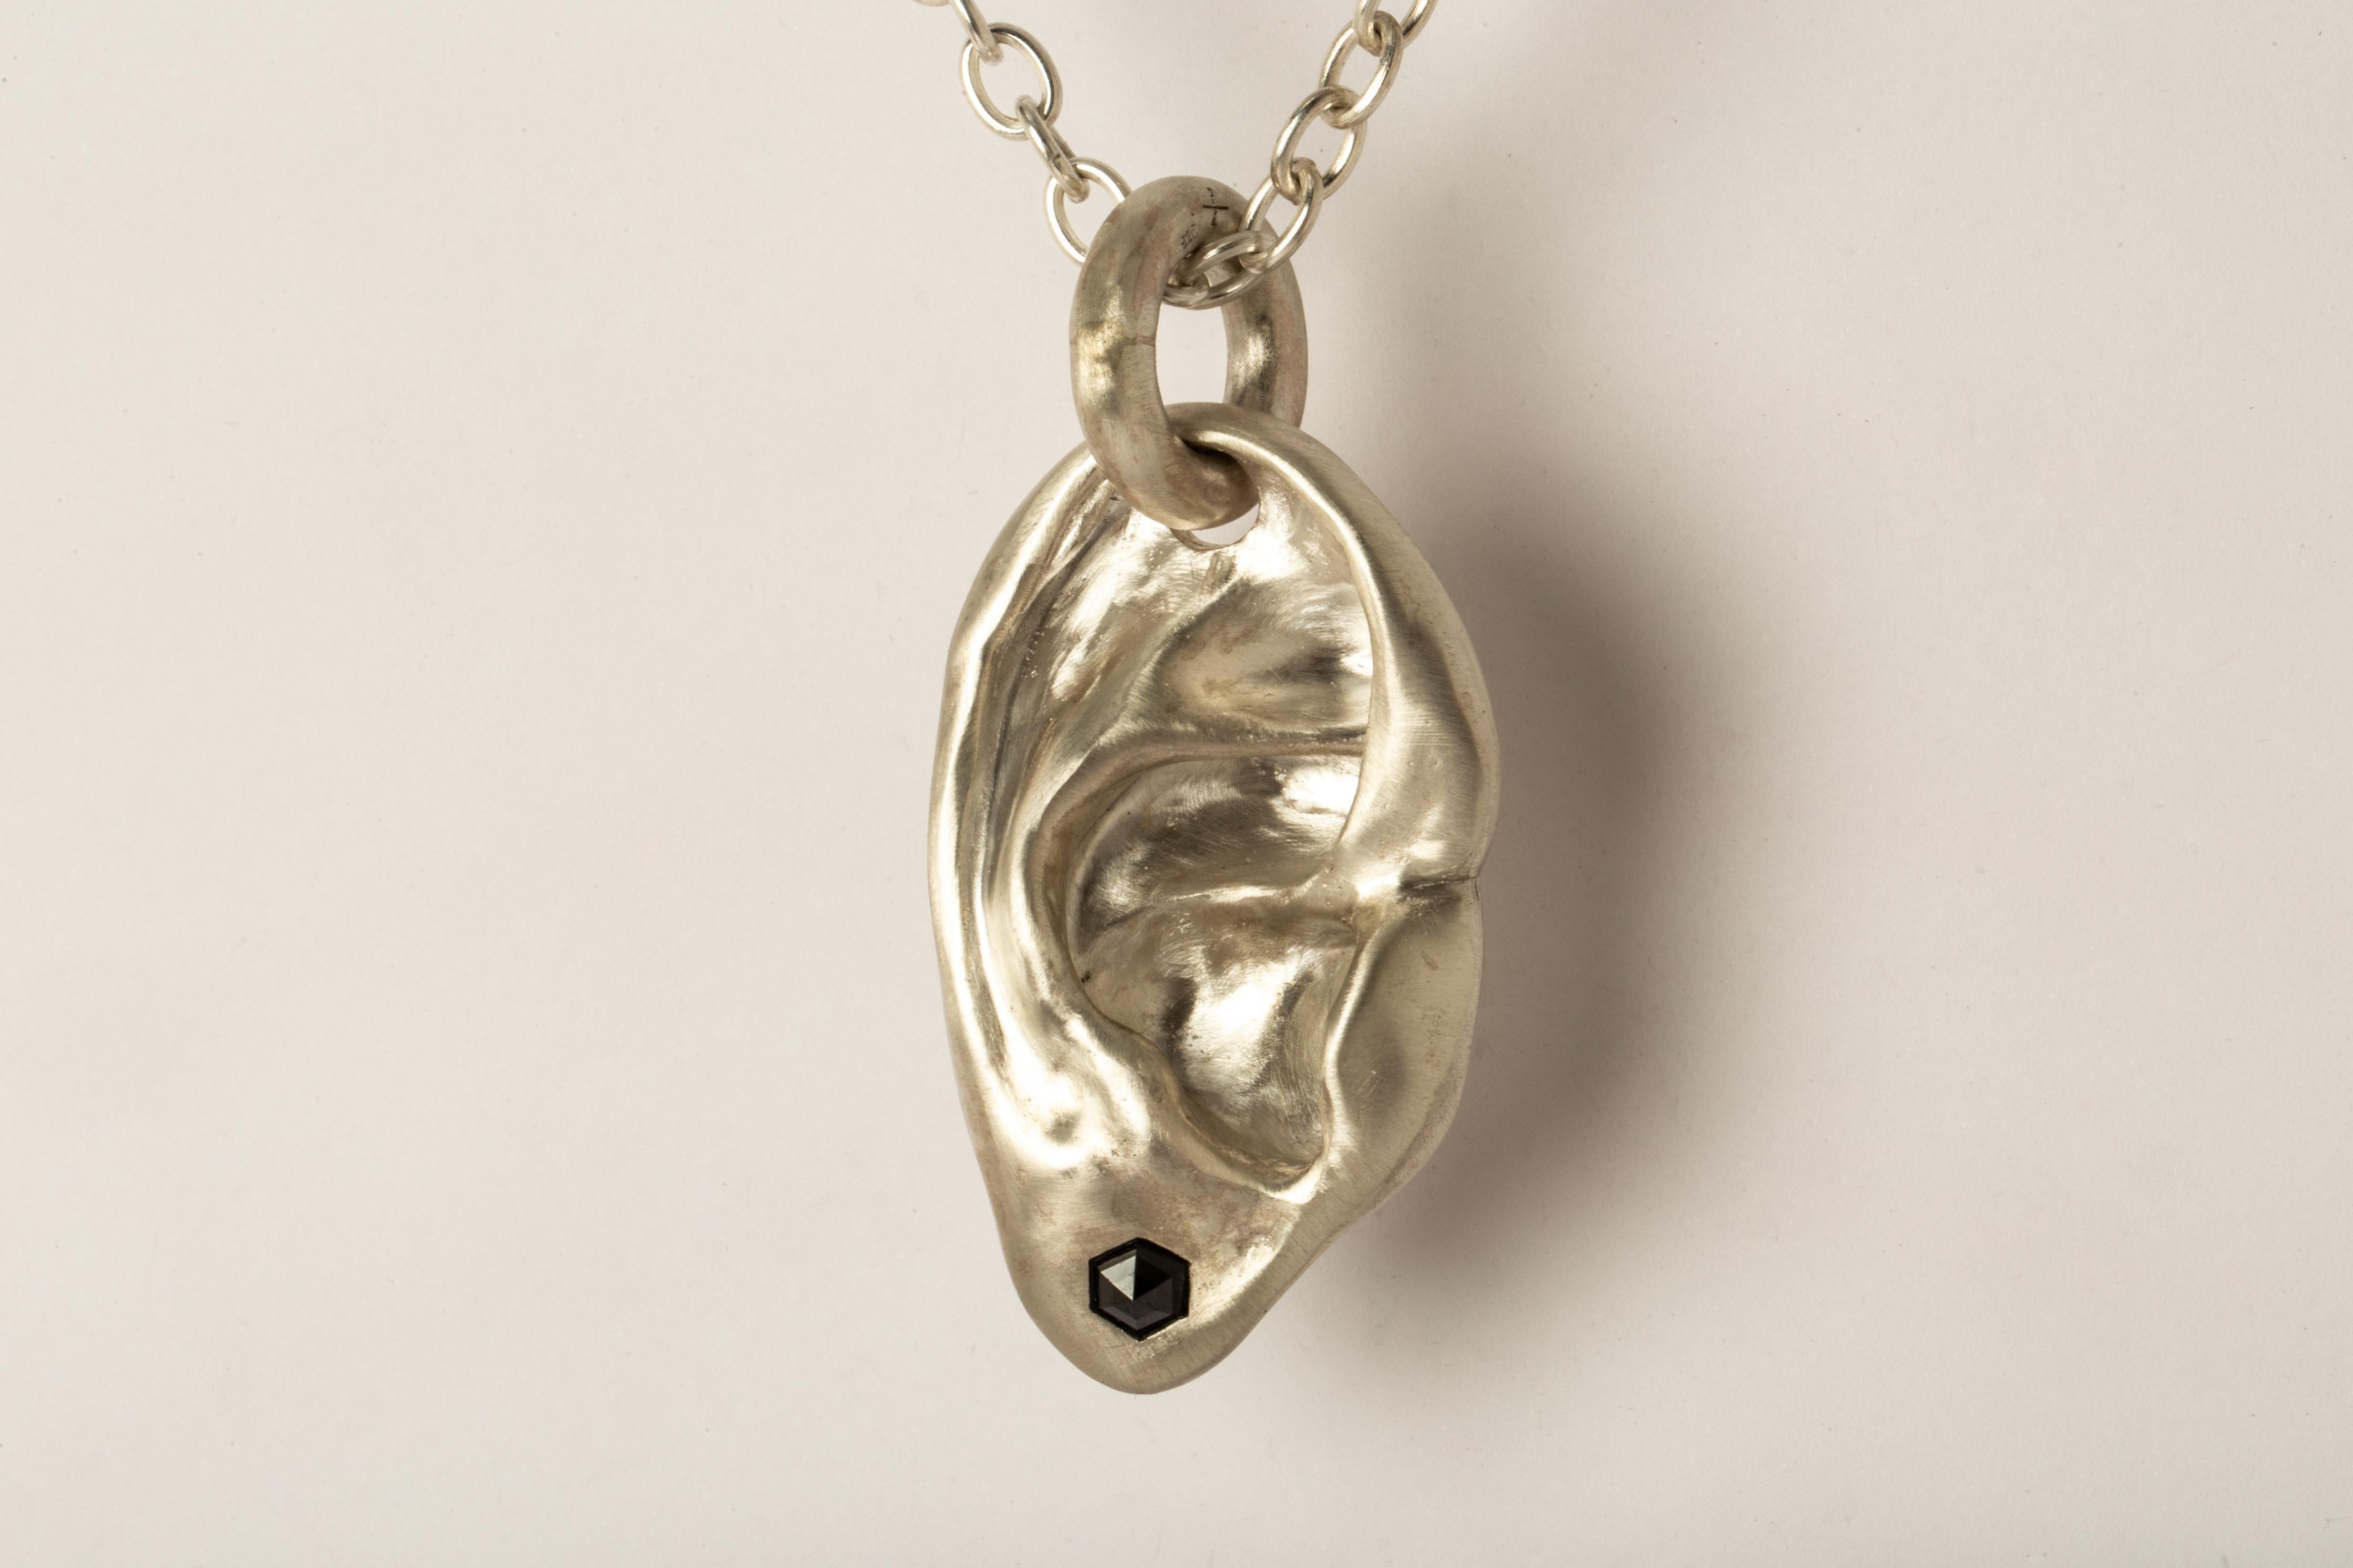 Pendant necklace in the shape of body part in sterling silver and a slab of black Hex shaped black diamond, it comes on a 74cm chain. This slab is removed from a larger chunk of diamond. This item is made with a naturally occurring element and will